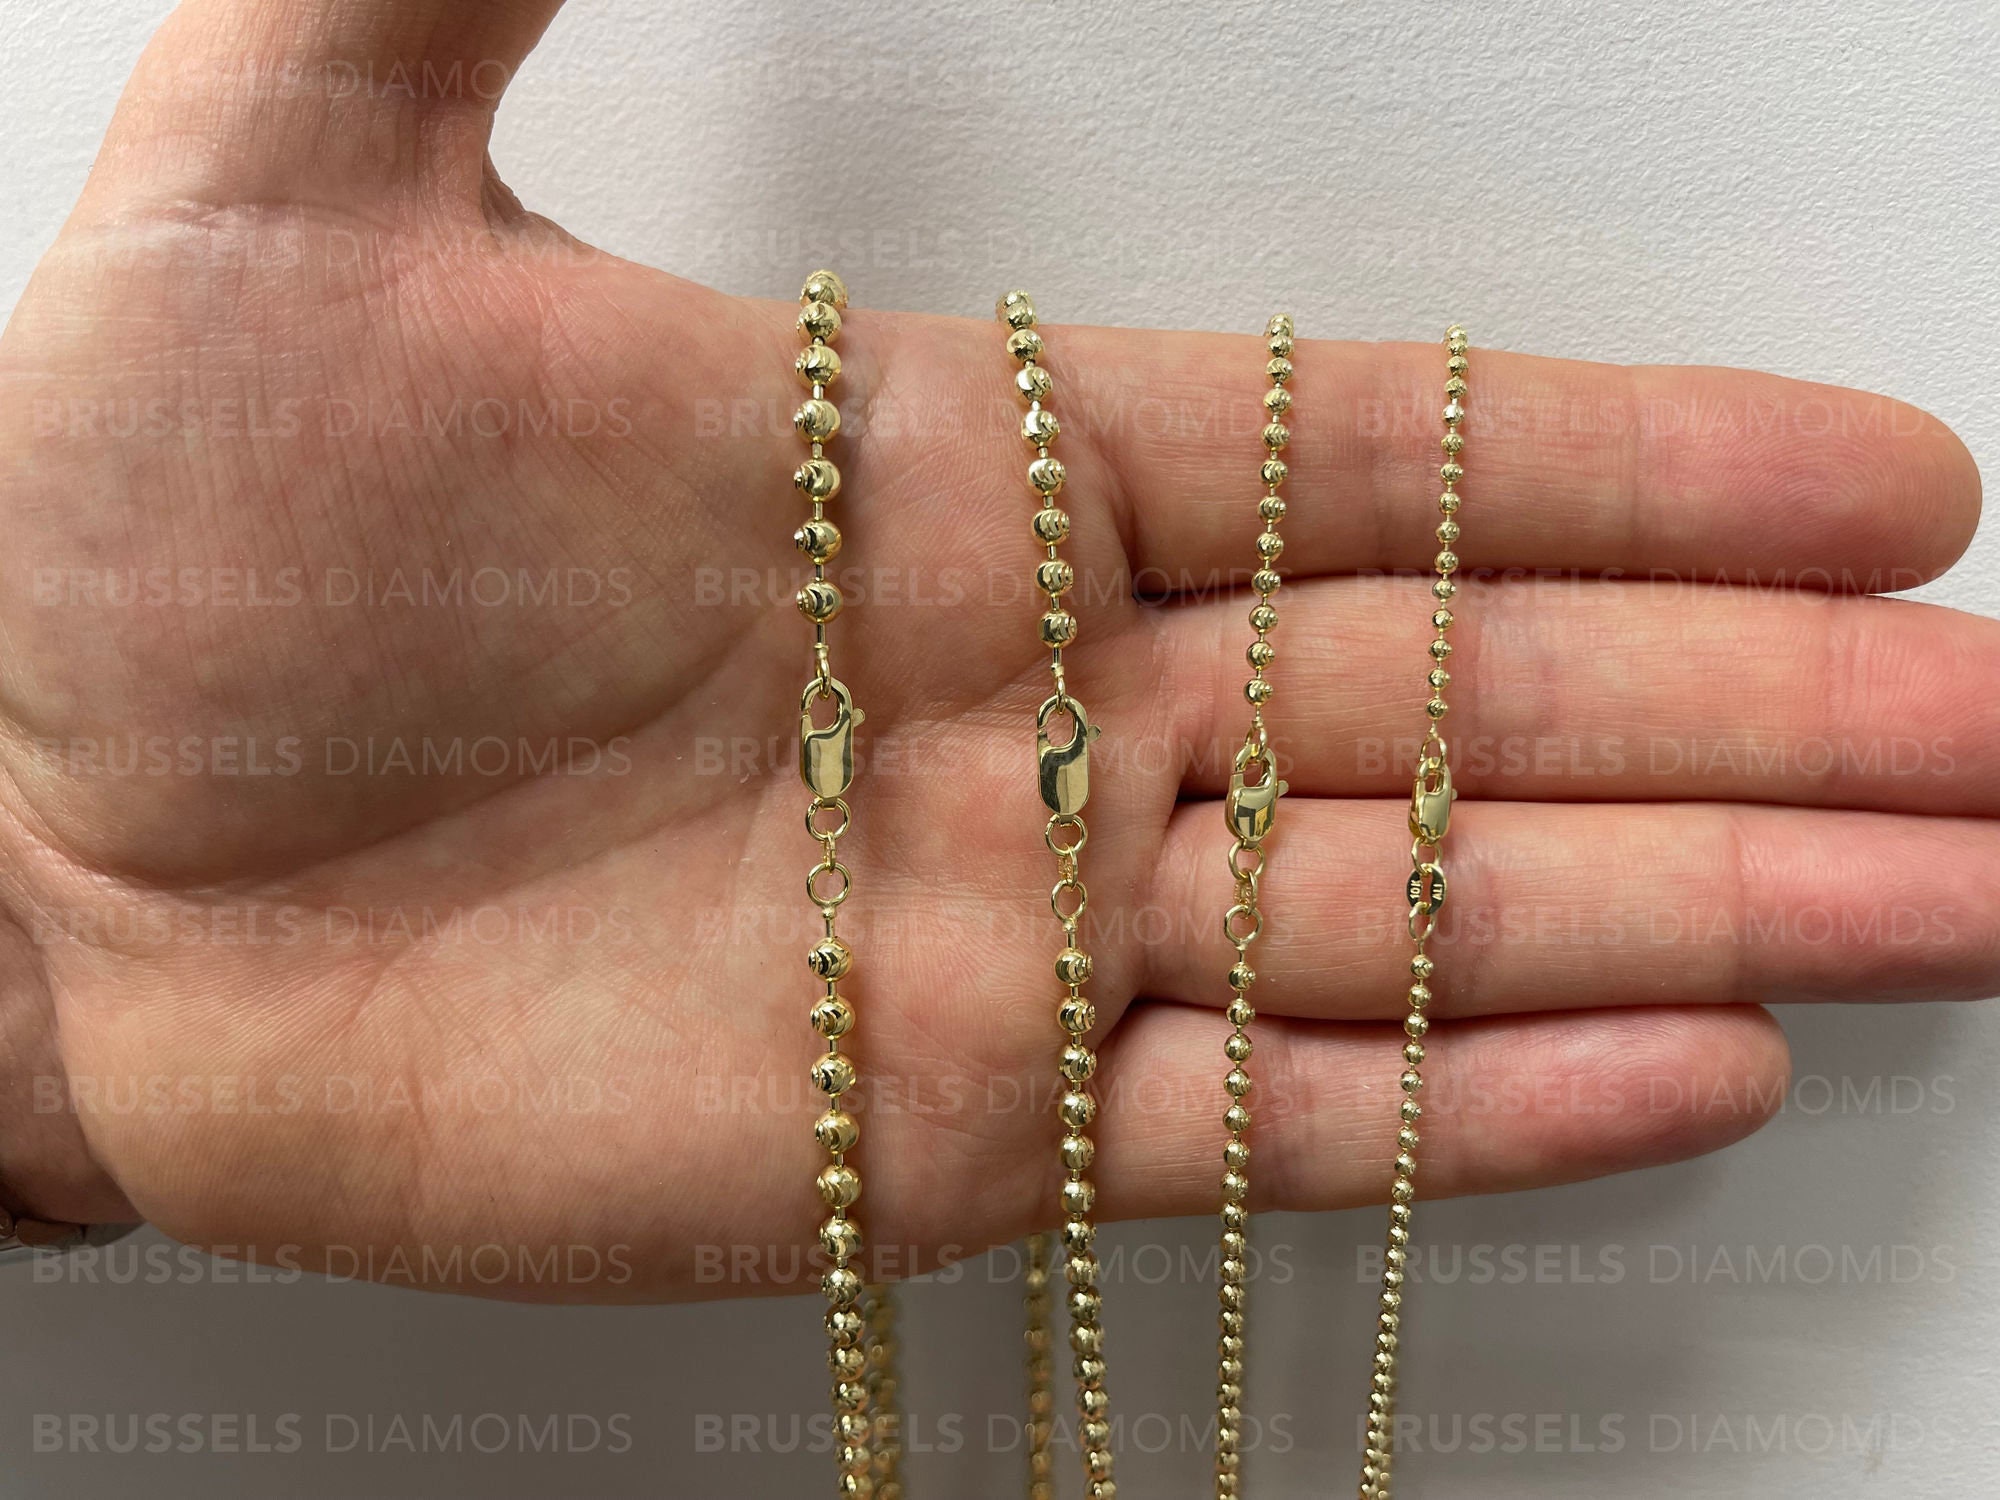 Solid 14k Gold 4mm Ball Beaded Link Chain Necklace 22 24 26 28 30 